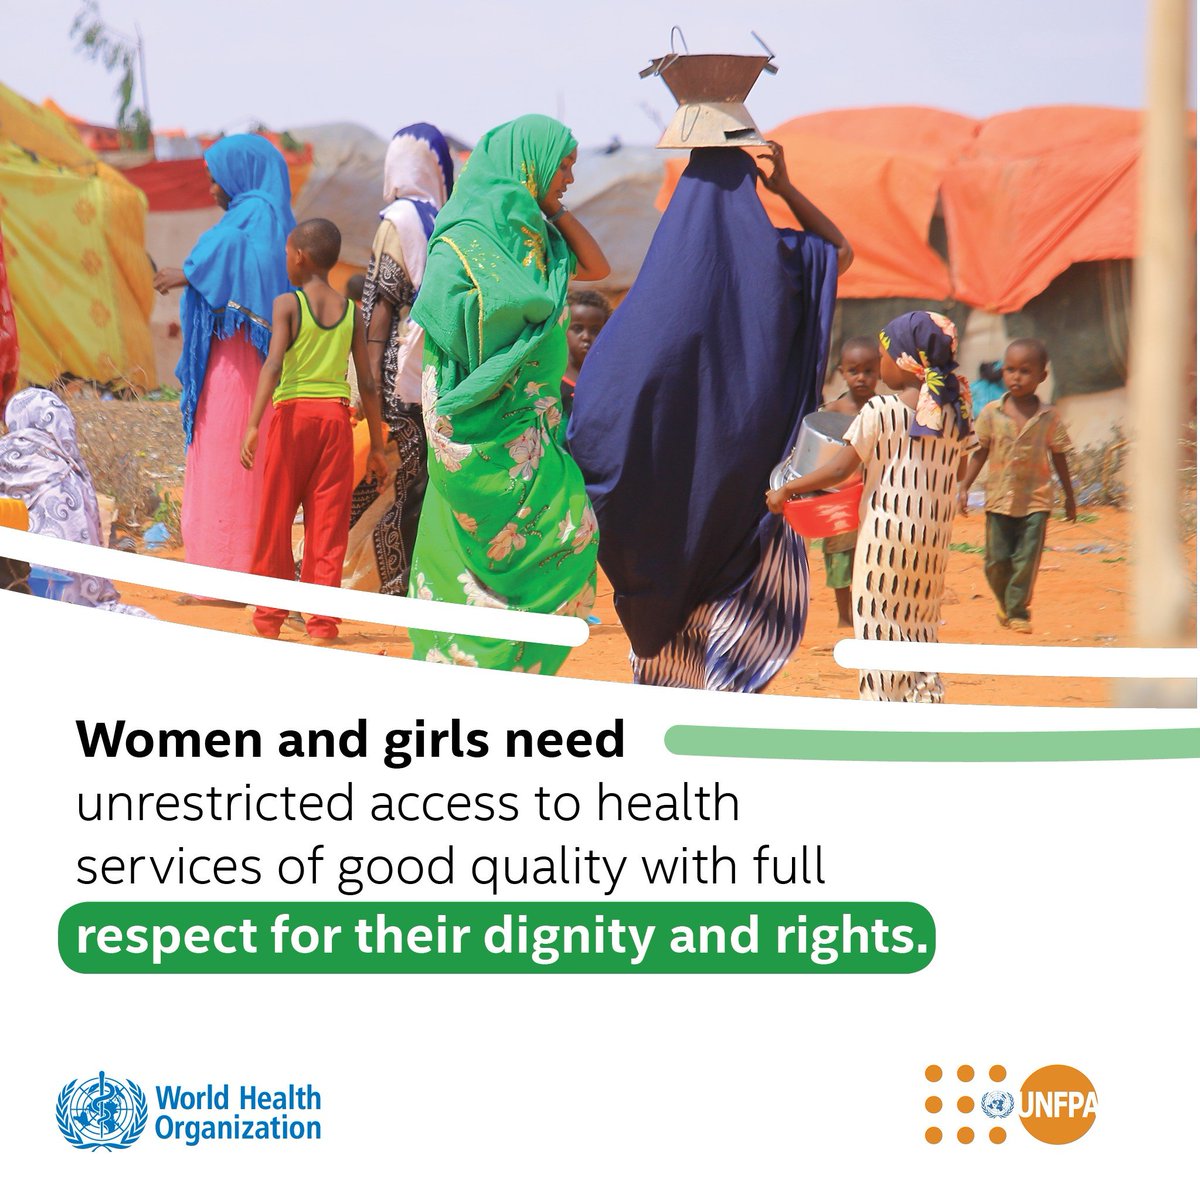 Women and girls need unrestricted access to good quality health services, with full respect for their dignity and rights. 📺 Watch this @WorldHealthSmt session to find out more: unf.pa/wss #StandUp4HumanRights #HealthForAll @WHO @WHOEMRO